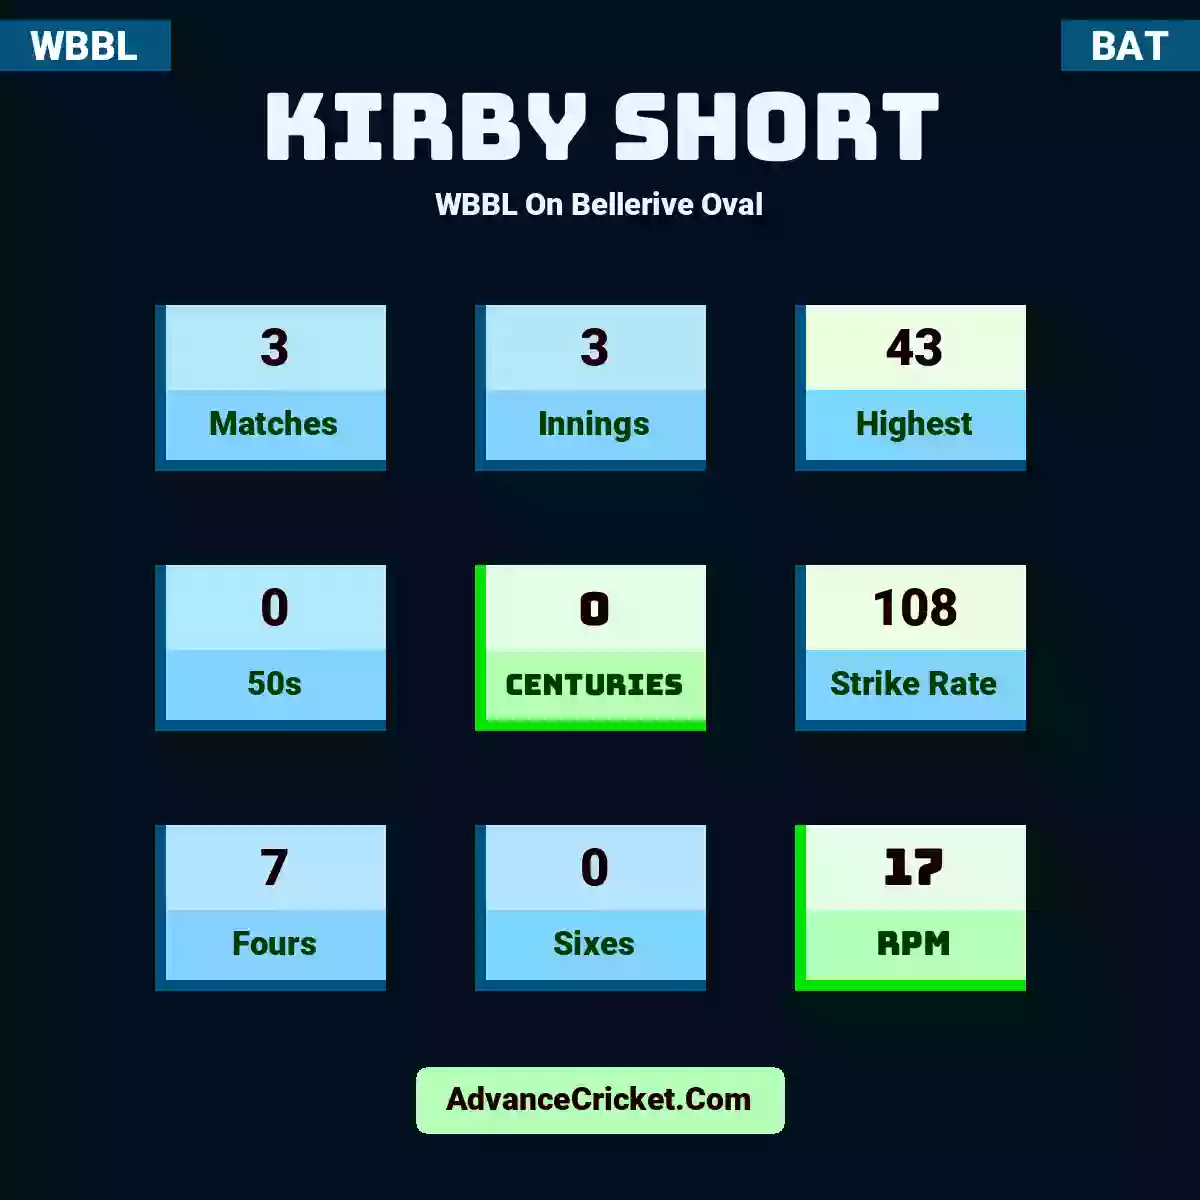 Kirby Short WBBL  On Bellerive Oval, Kirby Short played 3 matches, scored 43 runs as highest, 0 half-centuries, and 0 centuries, with a strike rate of 108. K.Short hit 7 fours and 0 sixes, with an RPM of 17.